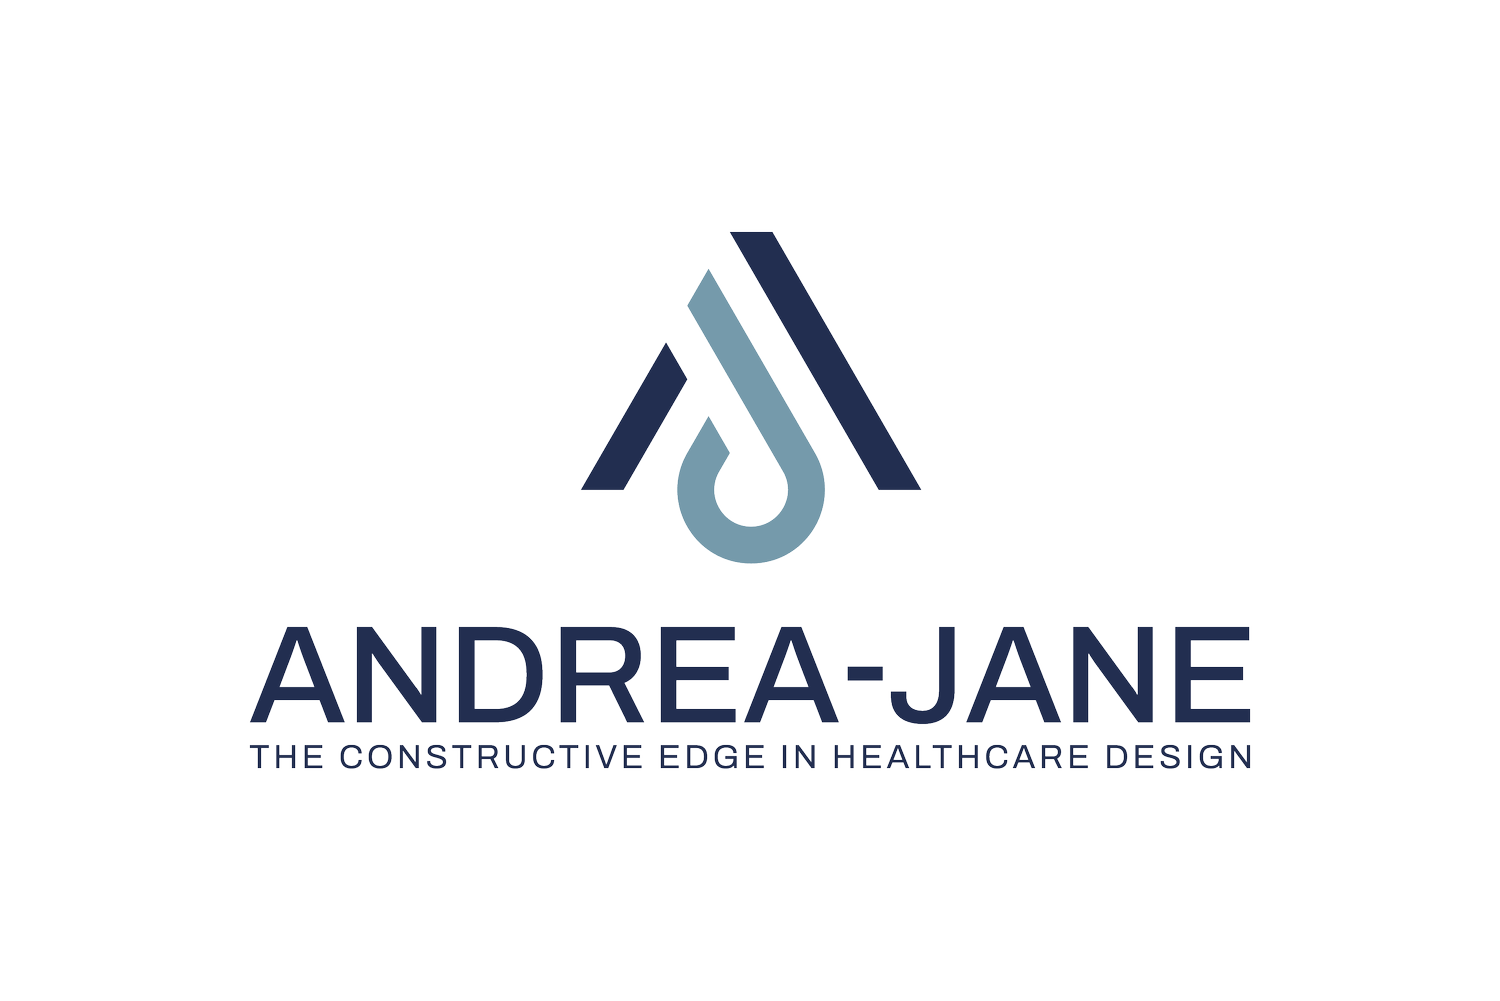 Andrea-Jane Consulting for Healthcare Projects in Architecture and Design